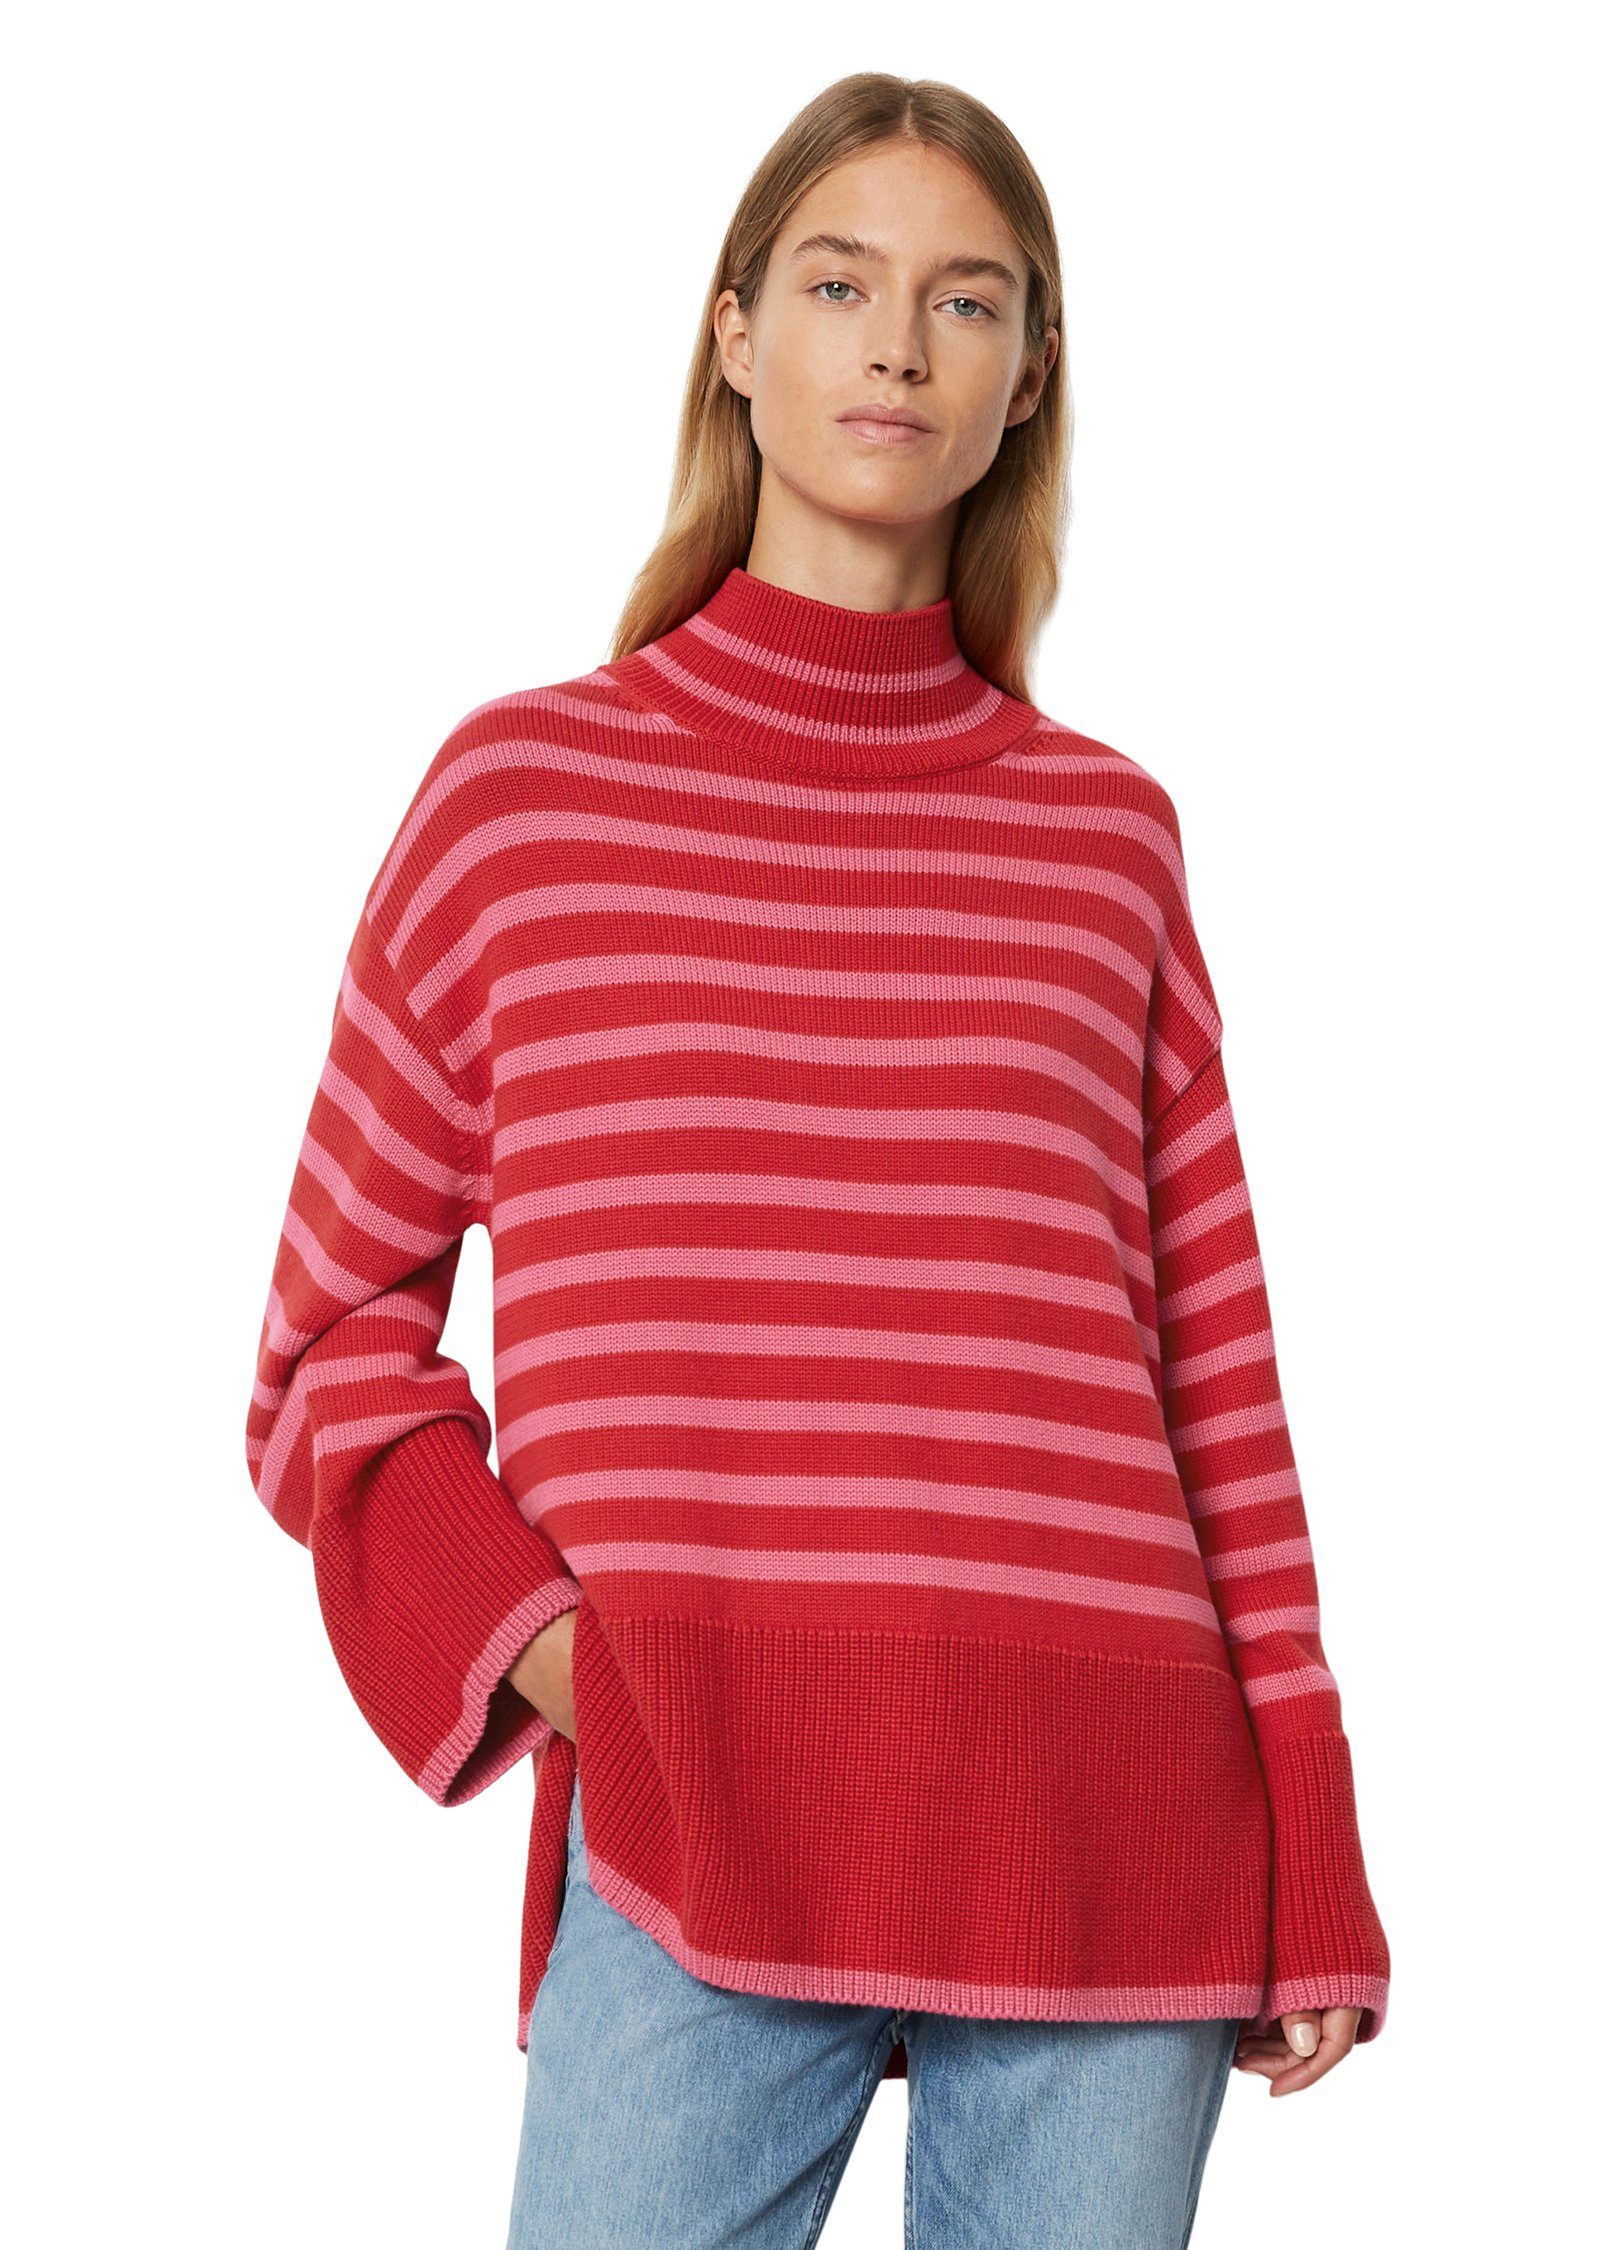 Marc O'Polo Strickpullover oversized multi/shiny red